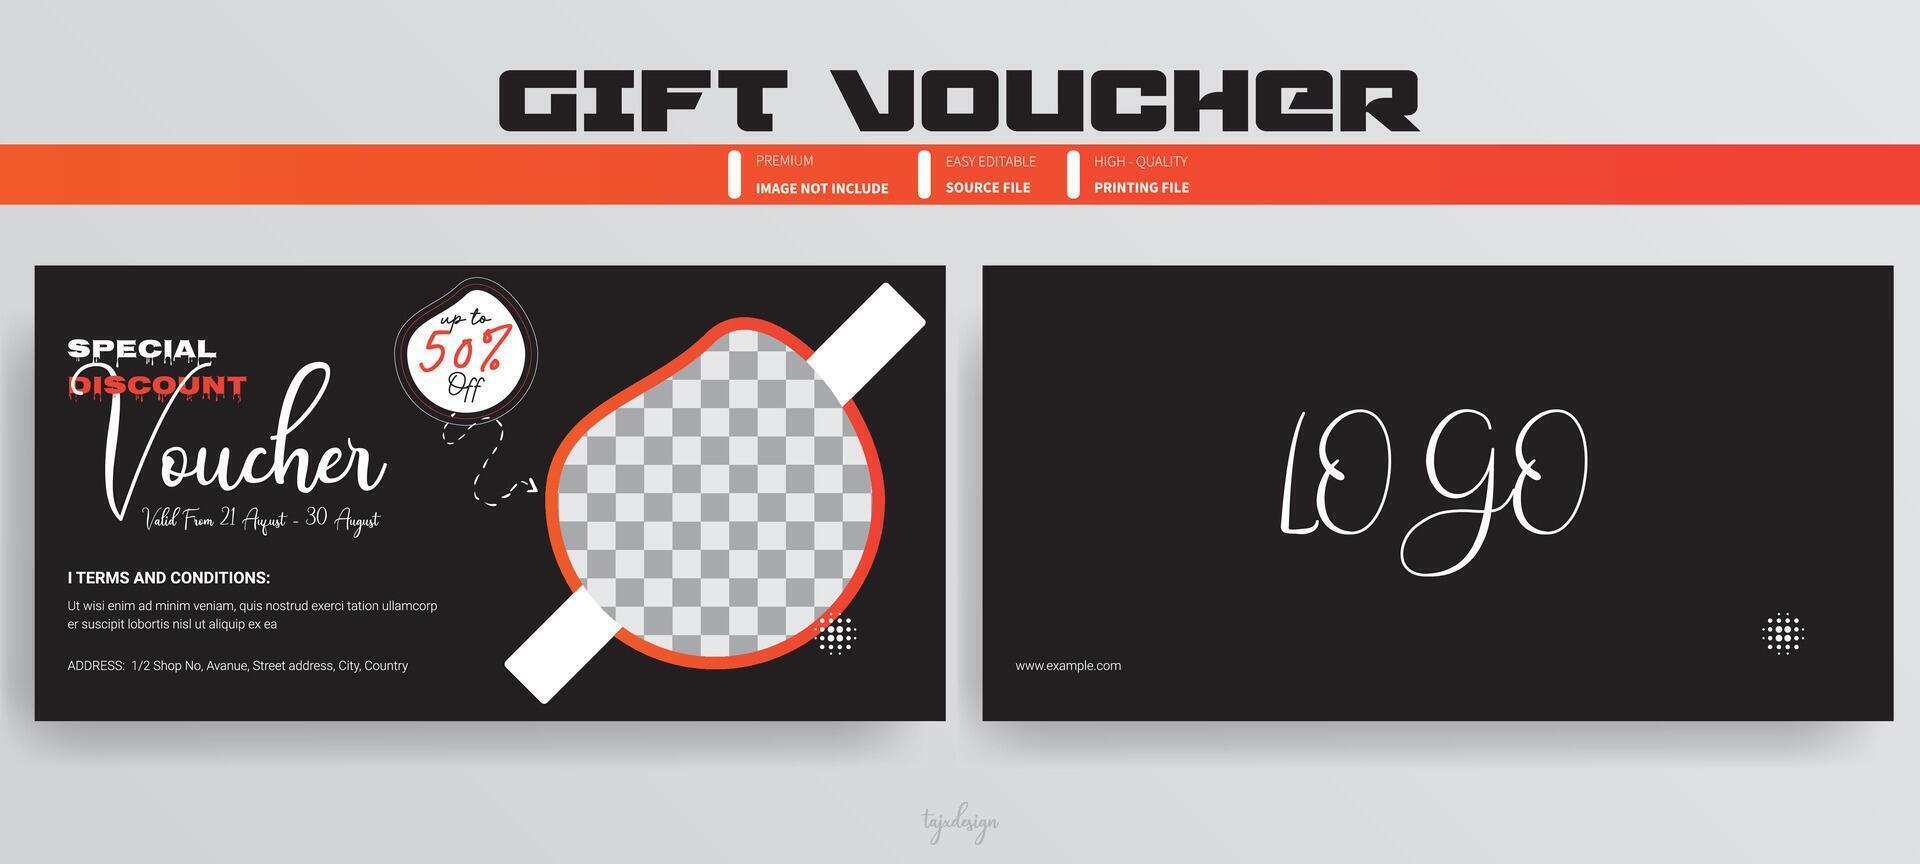 Discount Restaurants Gift Voucher Template Design, Promotion gift coupon, coupon card for your business advertisements, Voucher, gift card, Add, Advertizing, Discount, Food, Graphic Design. vector